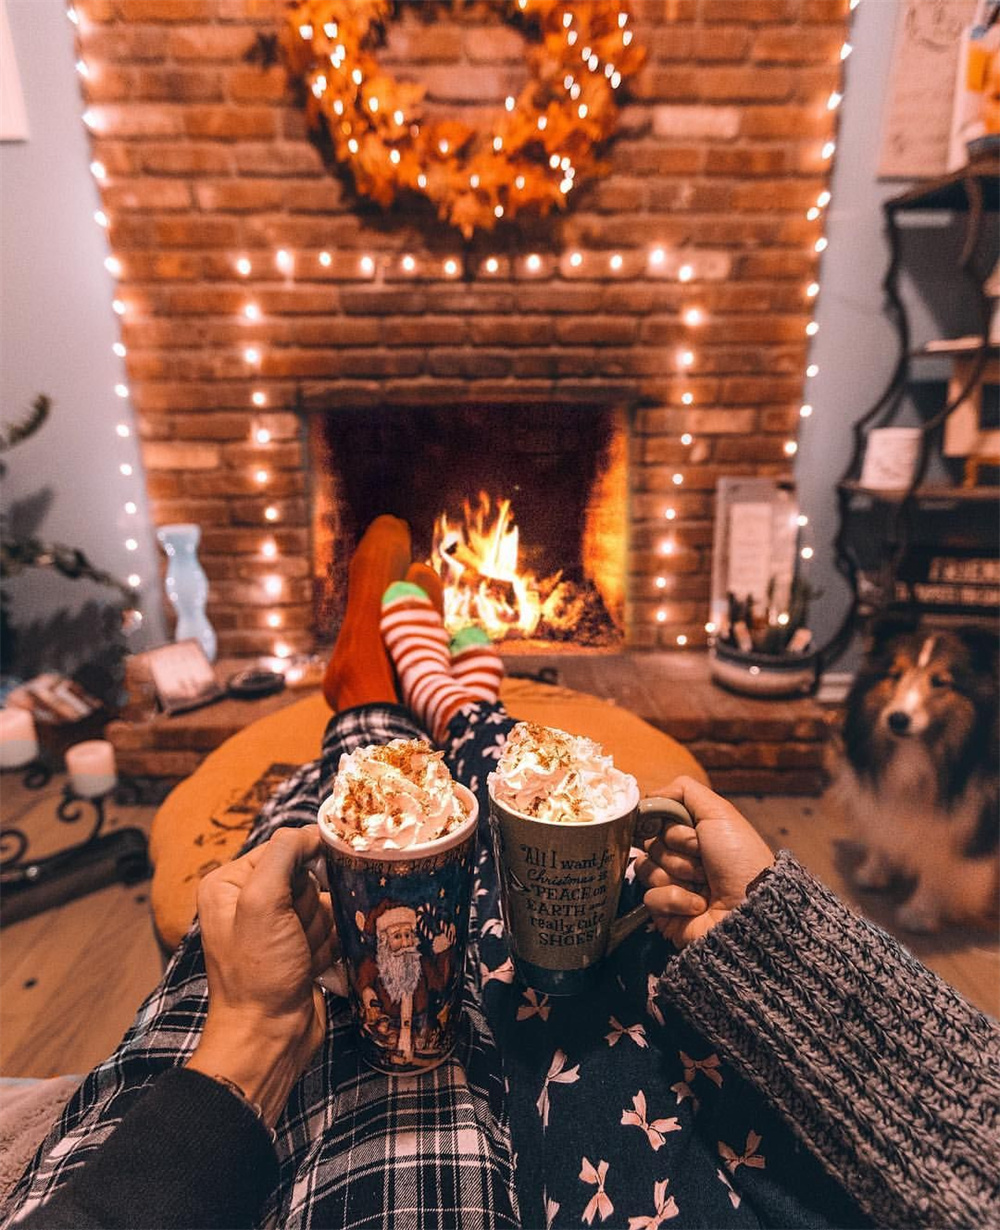 A Cozy Fireside Moment